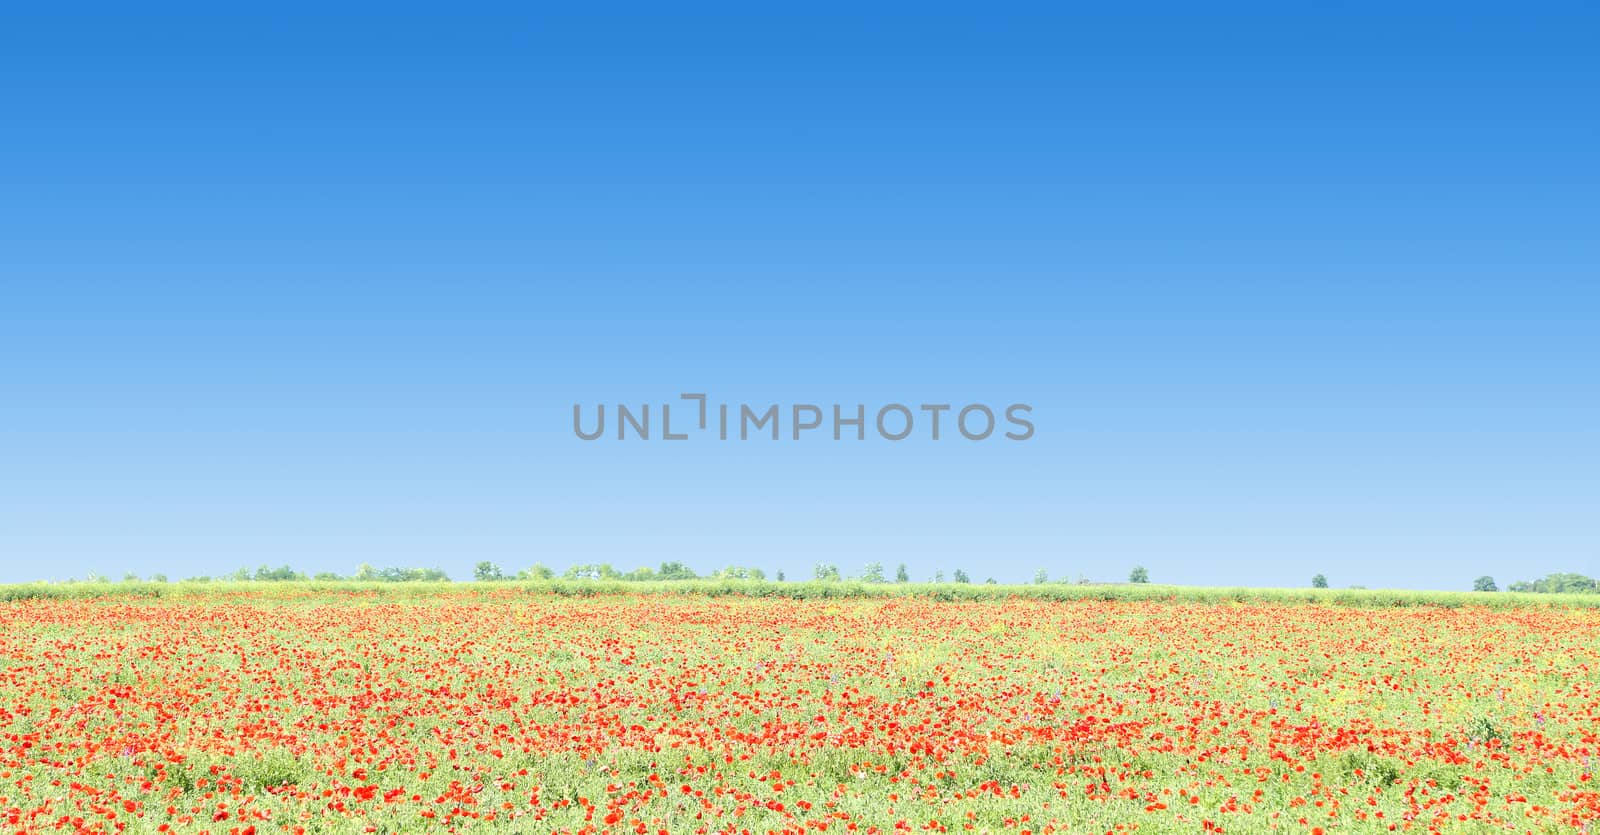 Poppy flowers against the blue sky and trees as a background